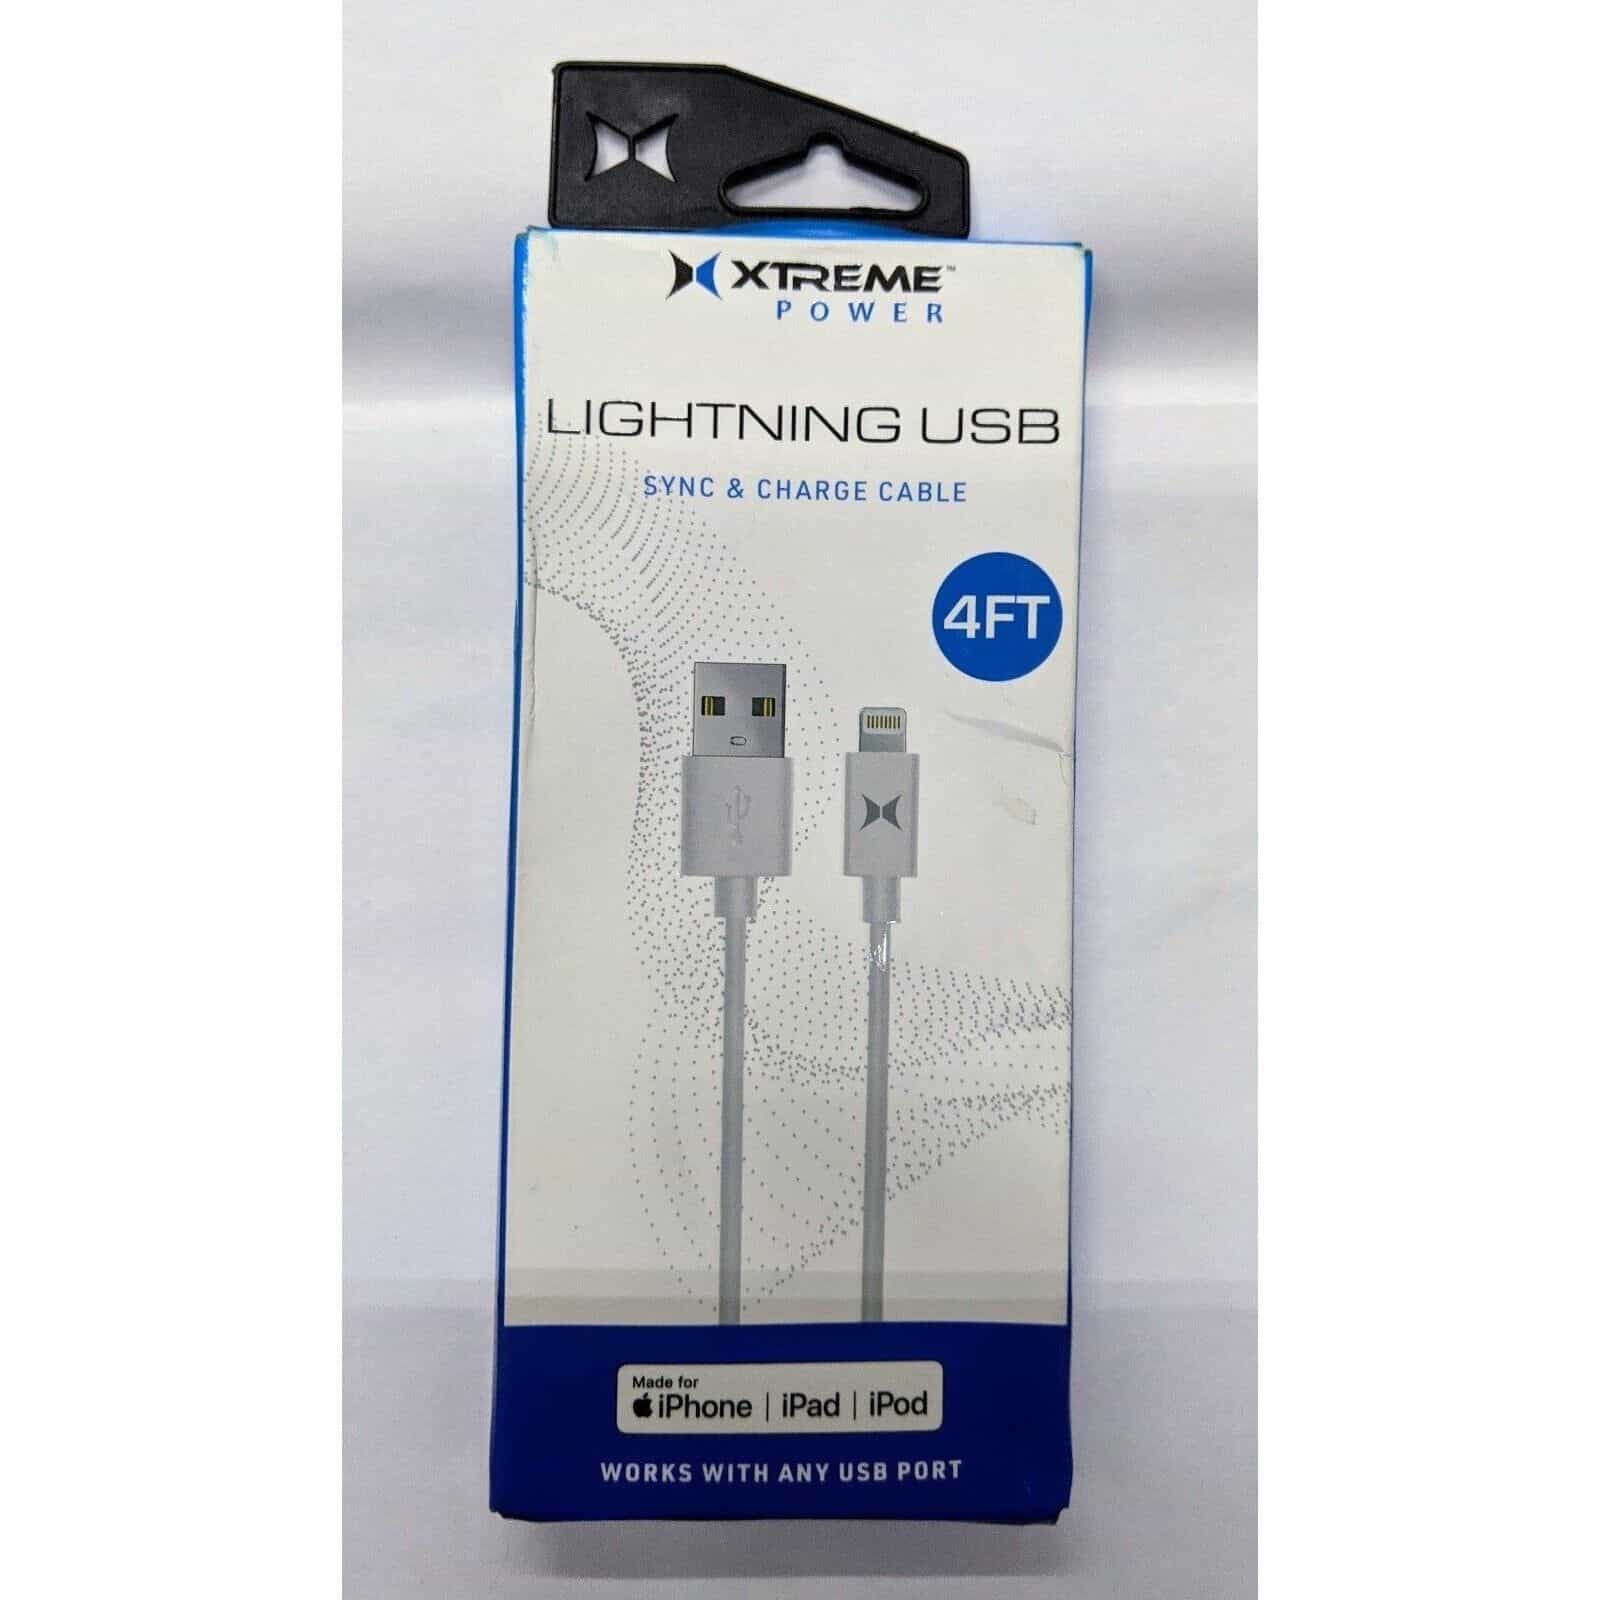 Lightning USB Sync & Charge Cable for iPhone, iPad, iPod